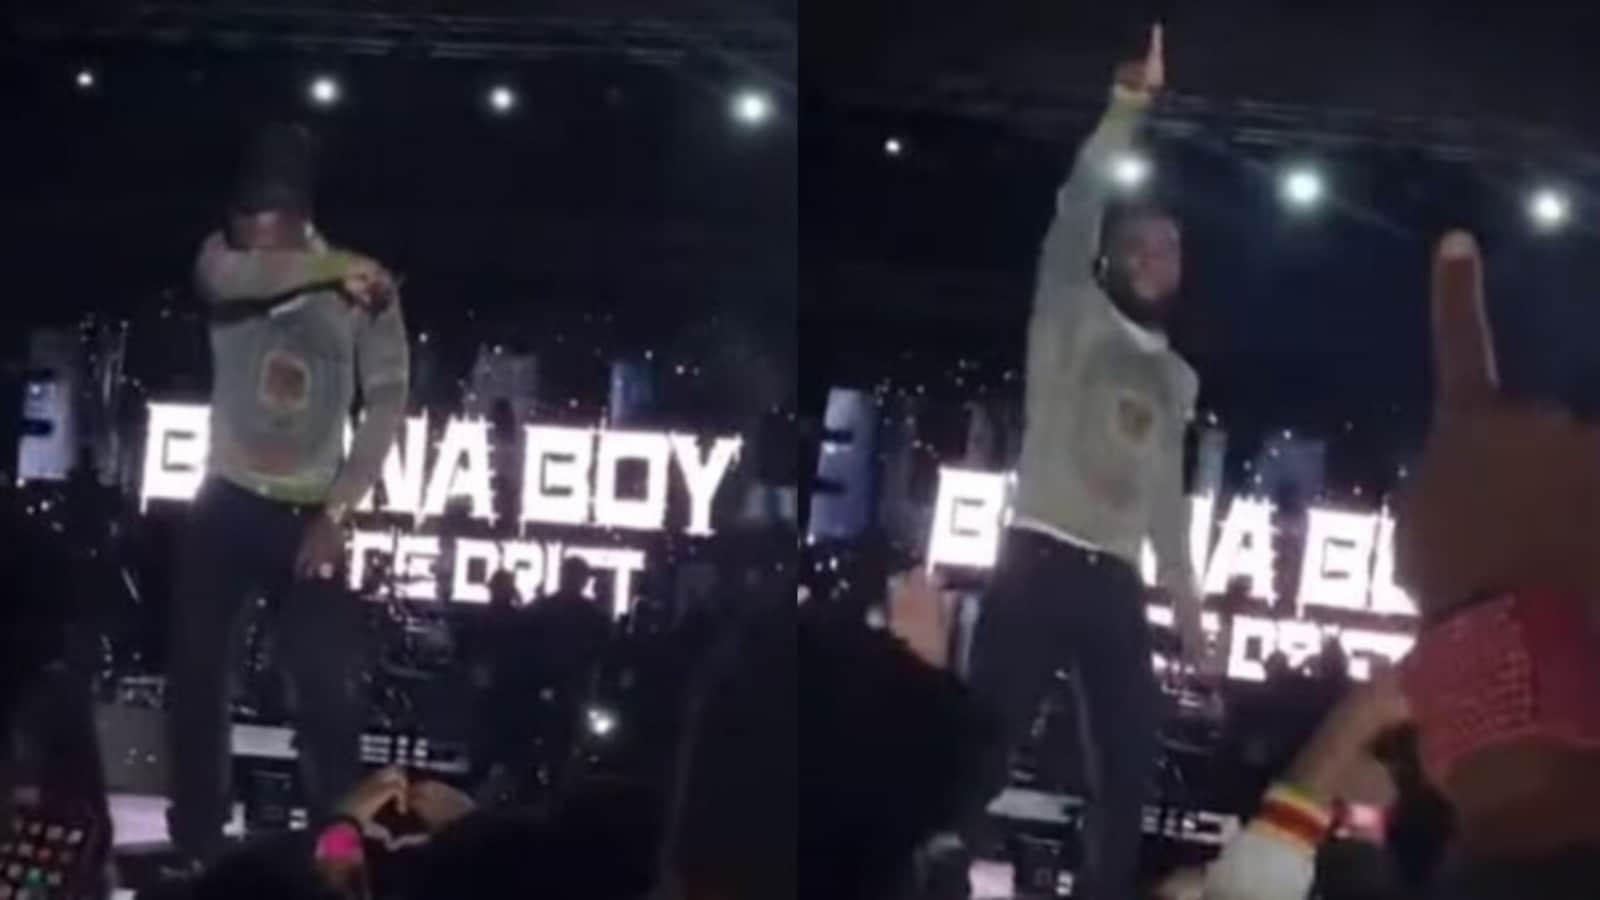 Sidhu Moose Wala: Nigerian singer Burna Boy pays rapper a teary-eyed tribute on stage with his signature step. Watch